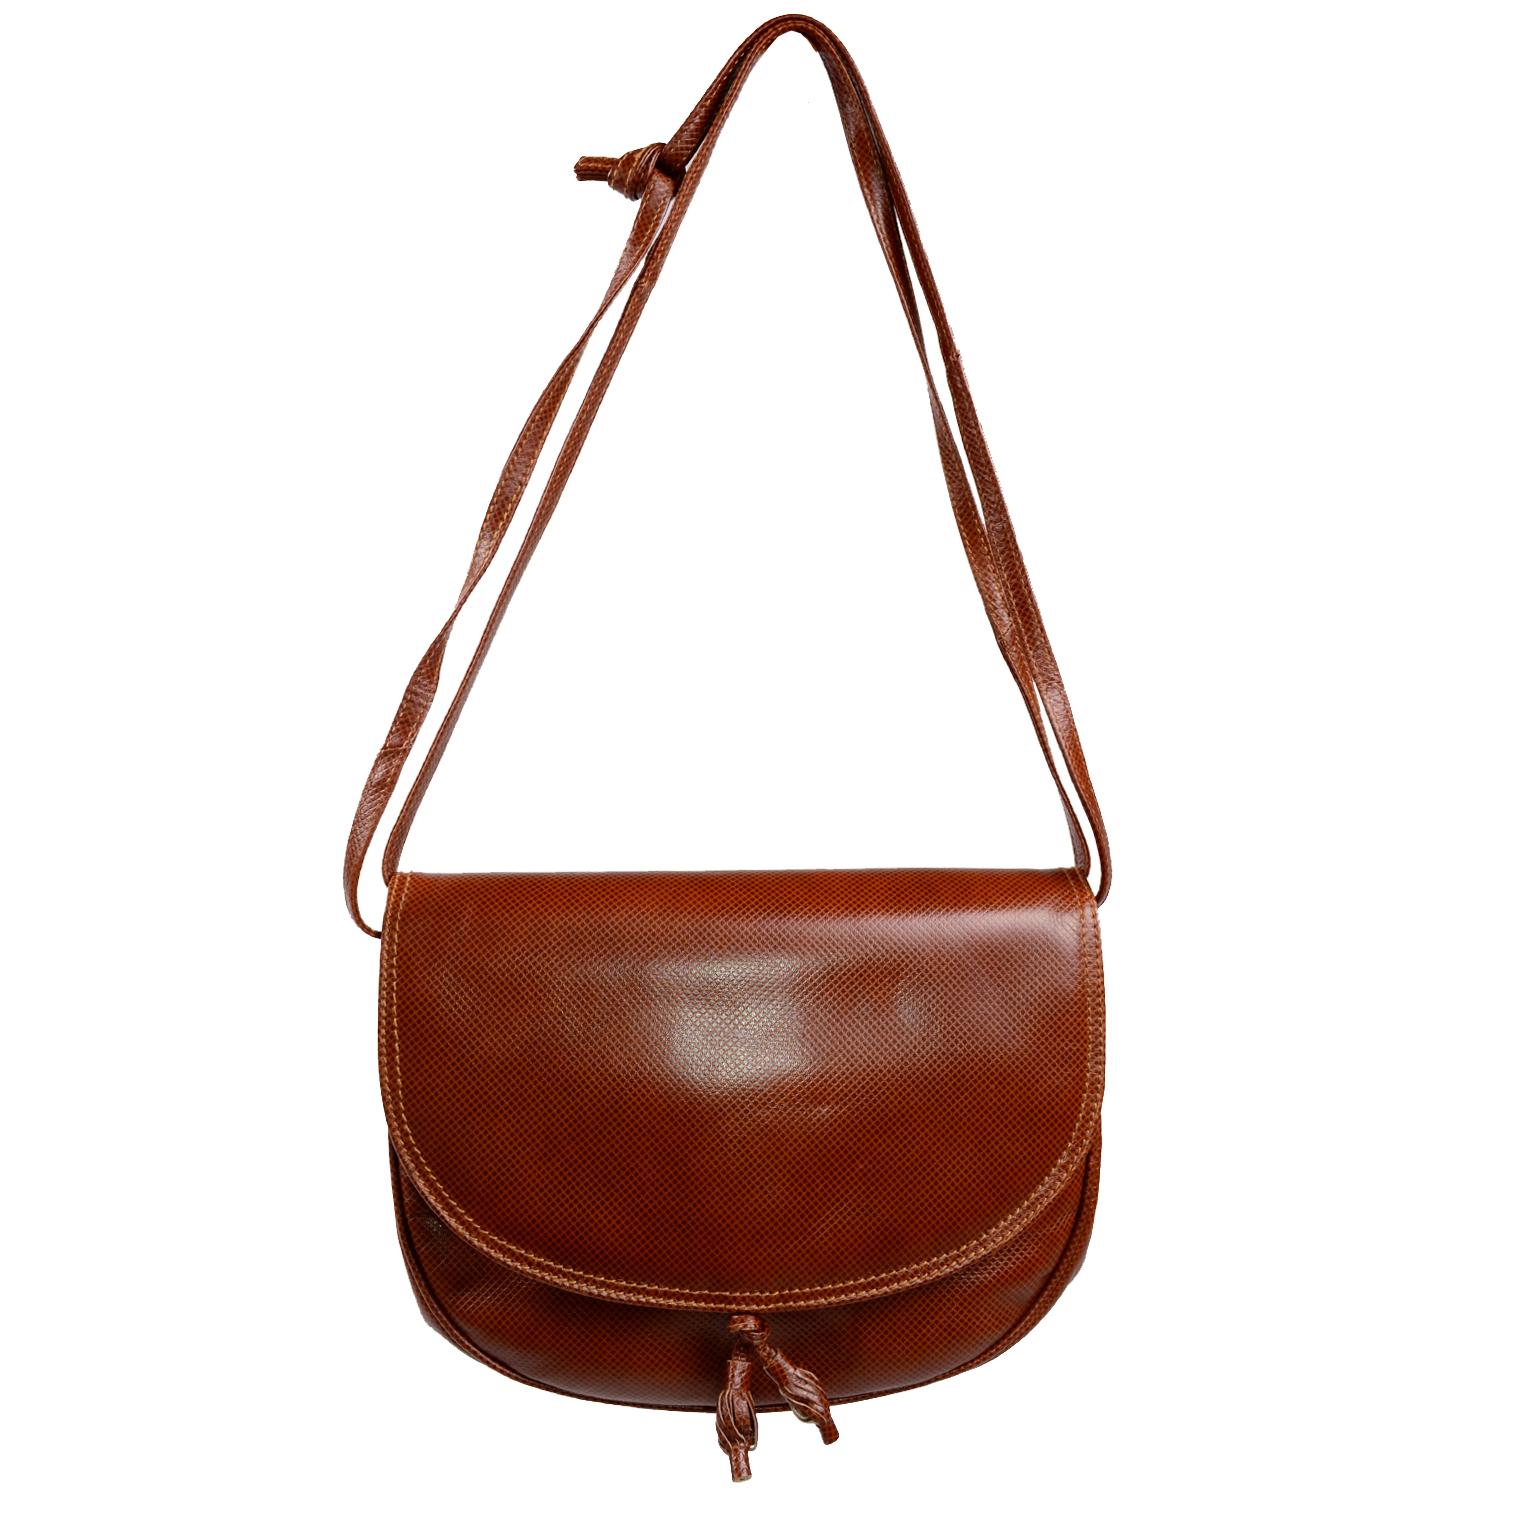 This is a nice vintage Bottega Veneta Caramel Leather Crossbody flap Bag. The bag can also be a shorter shoulder bag when the straps are doubled.There is another flap under the main flap with a pocket and it closes with a snap. There is another